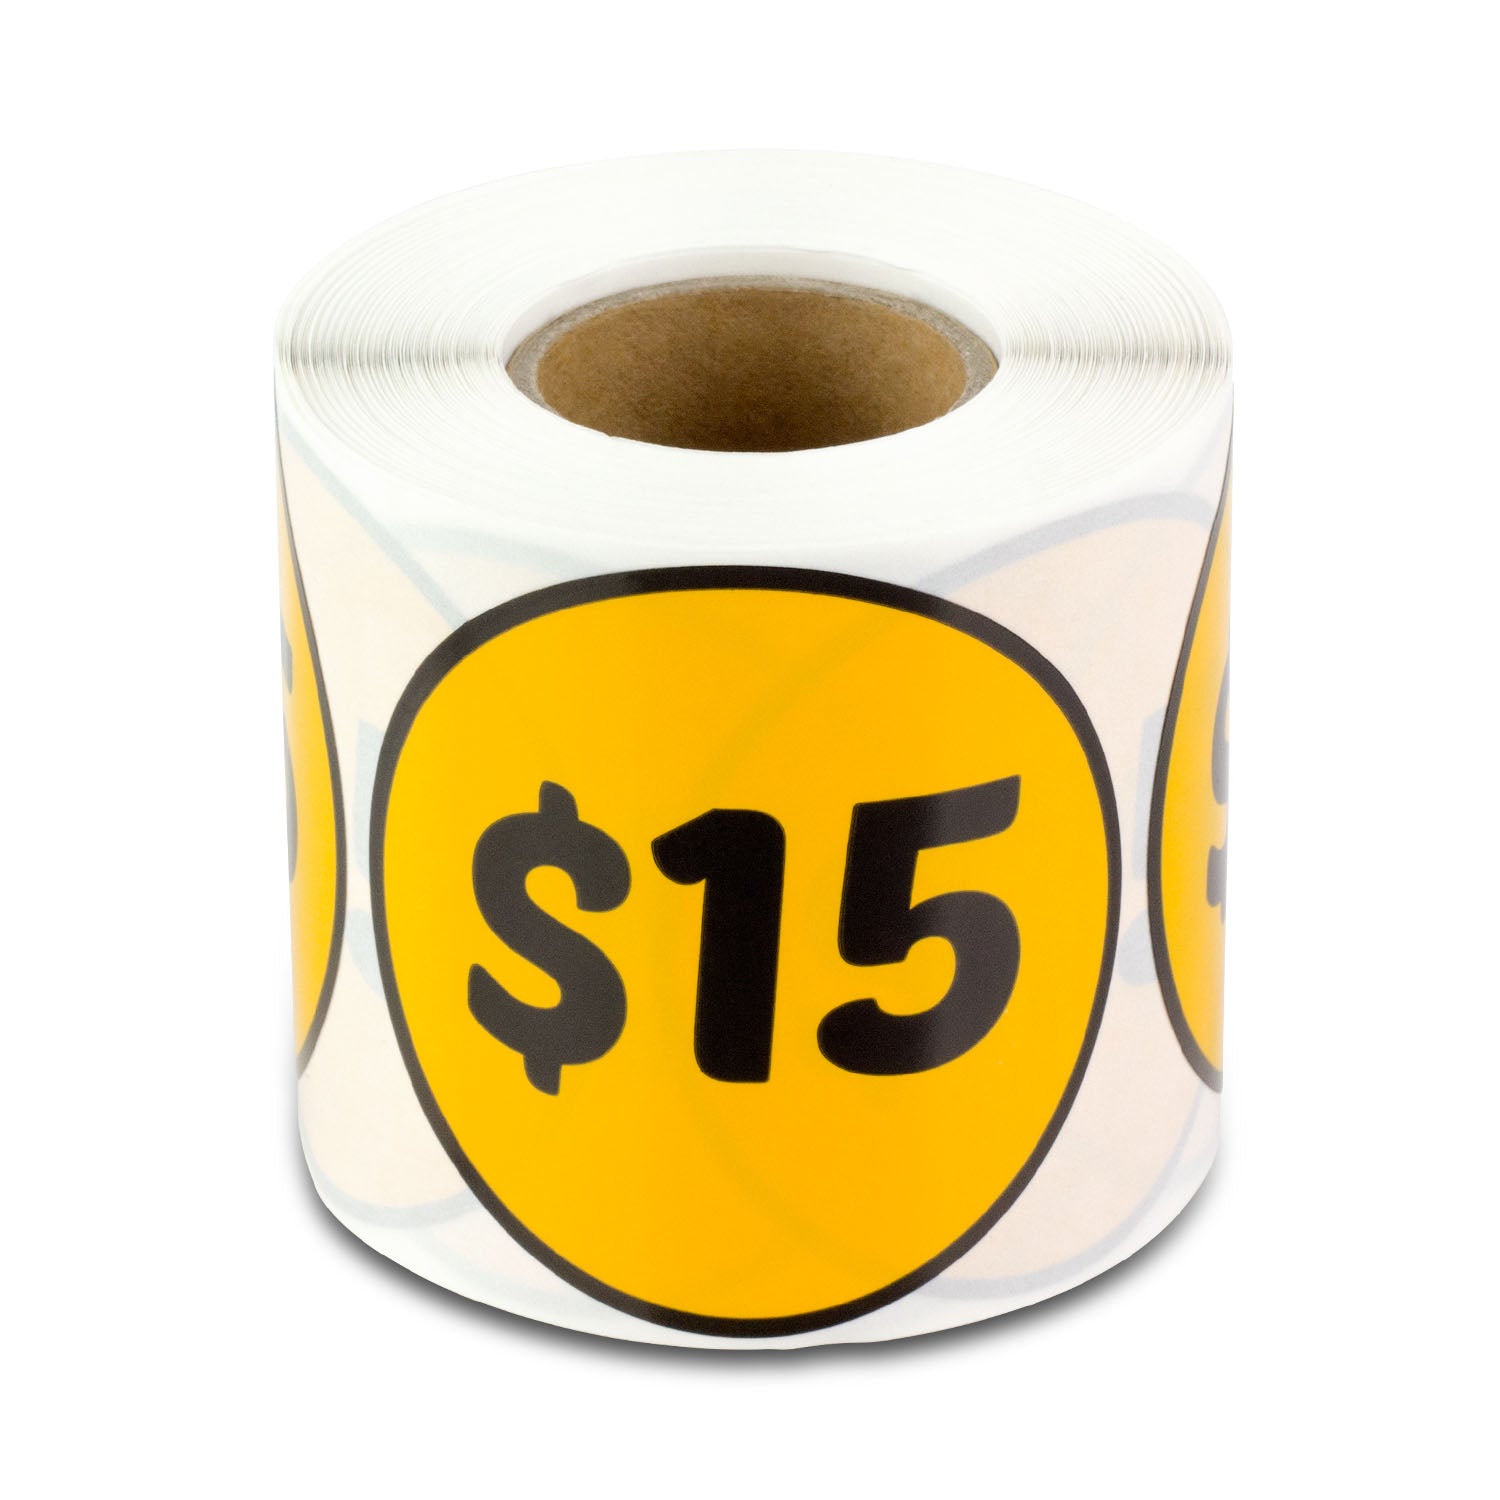 2 inch  Retail & Sales: 25 Cent Stickers / ¢25 Cent Price Stickers –  OfficeSmartLabels